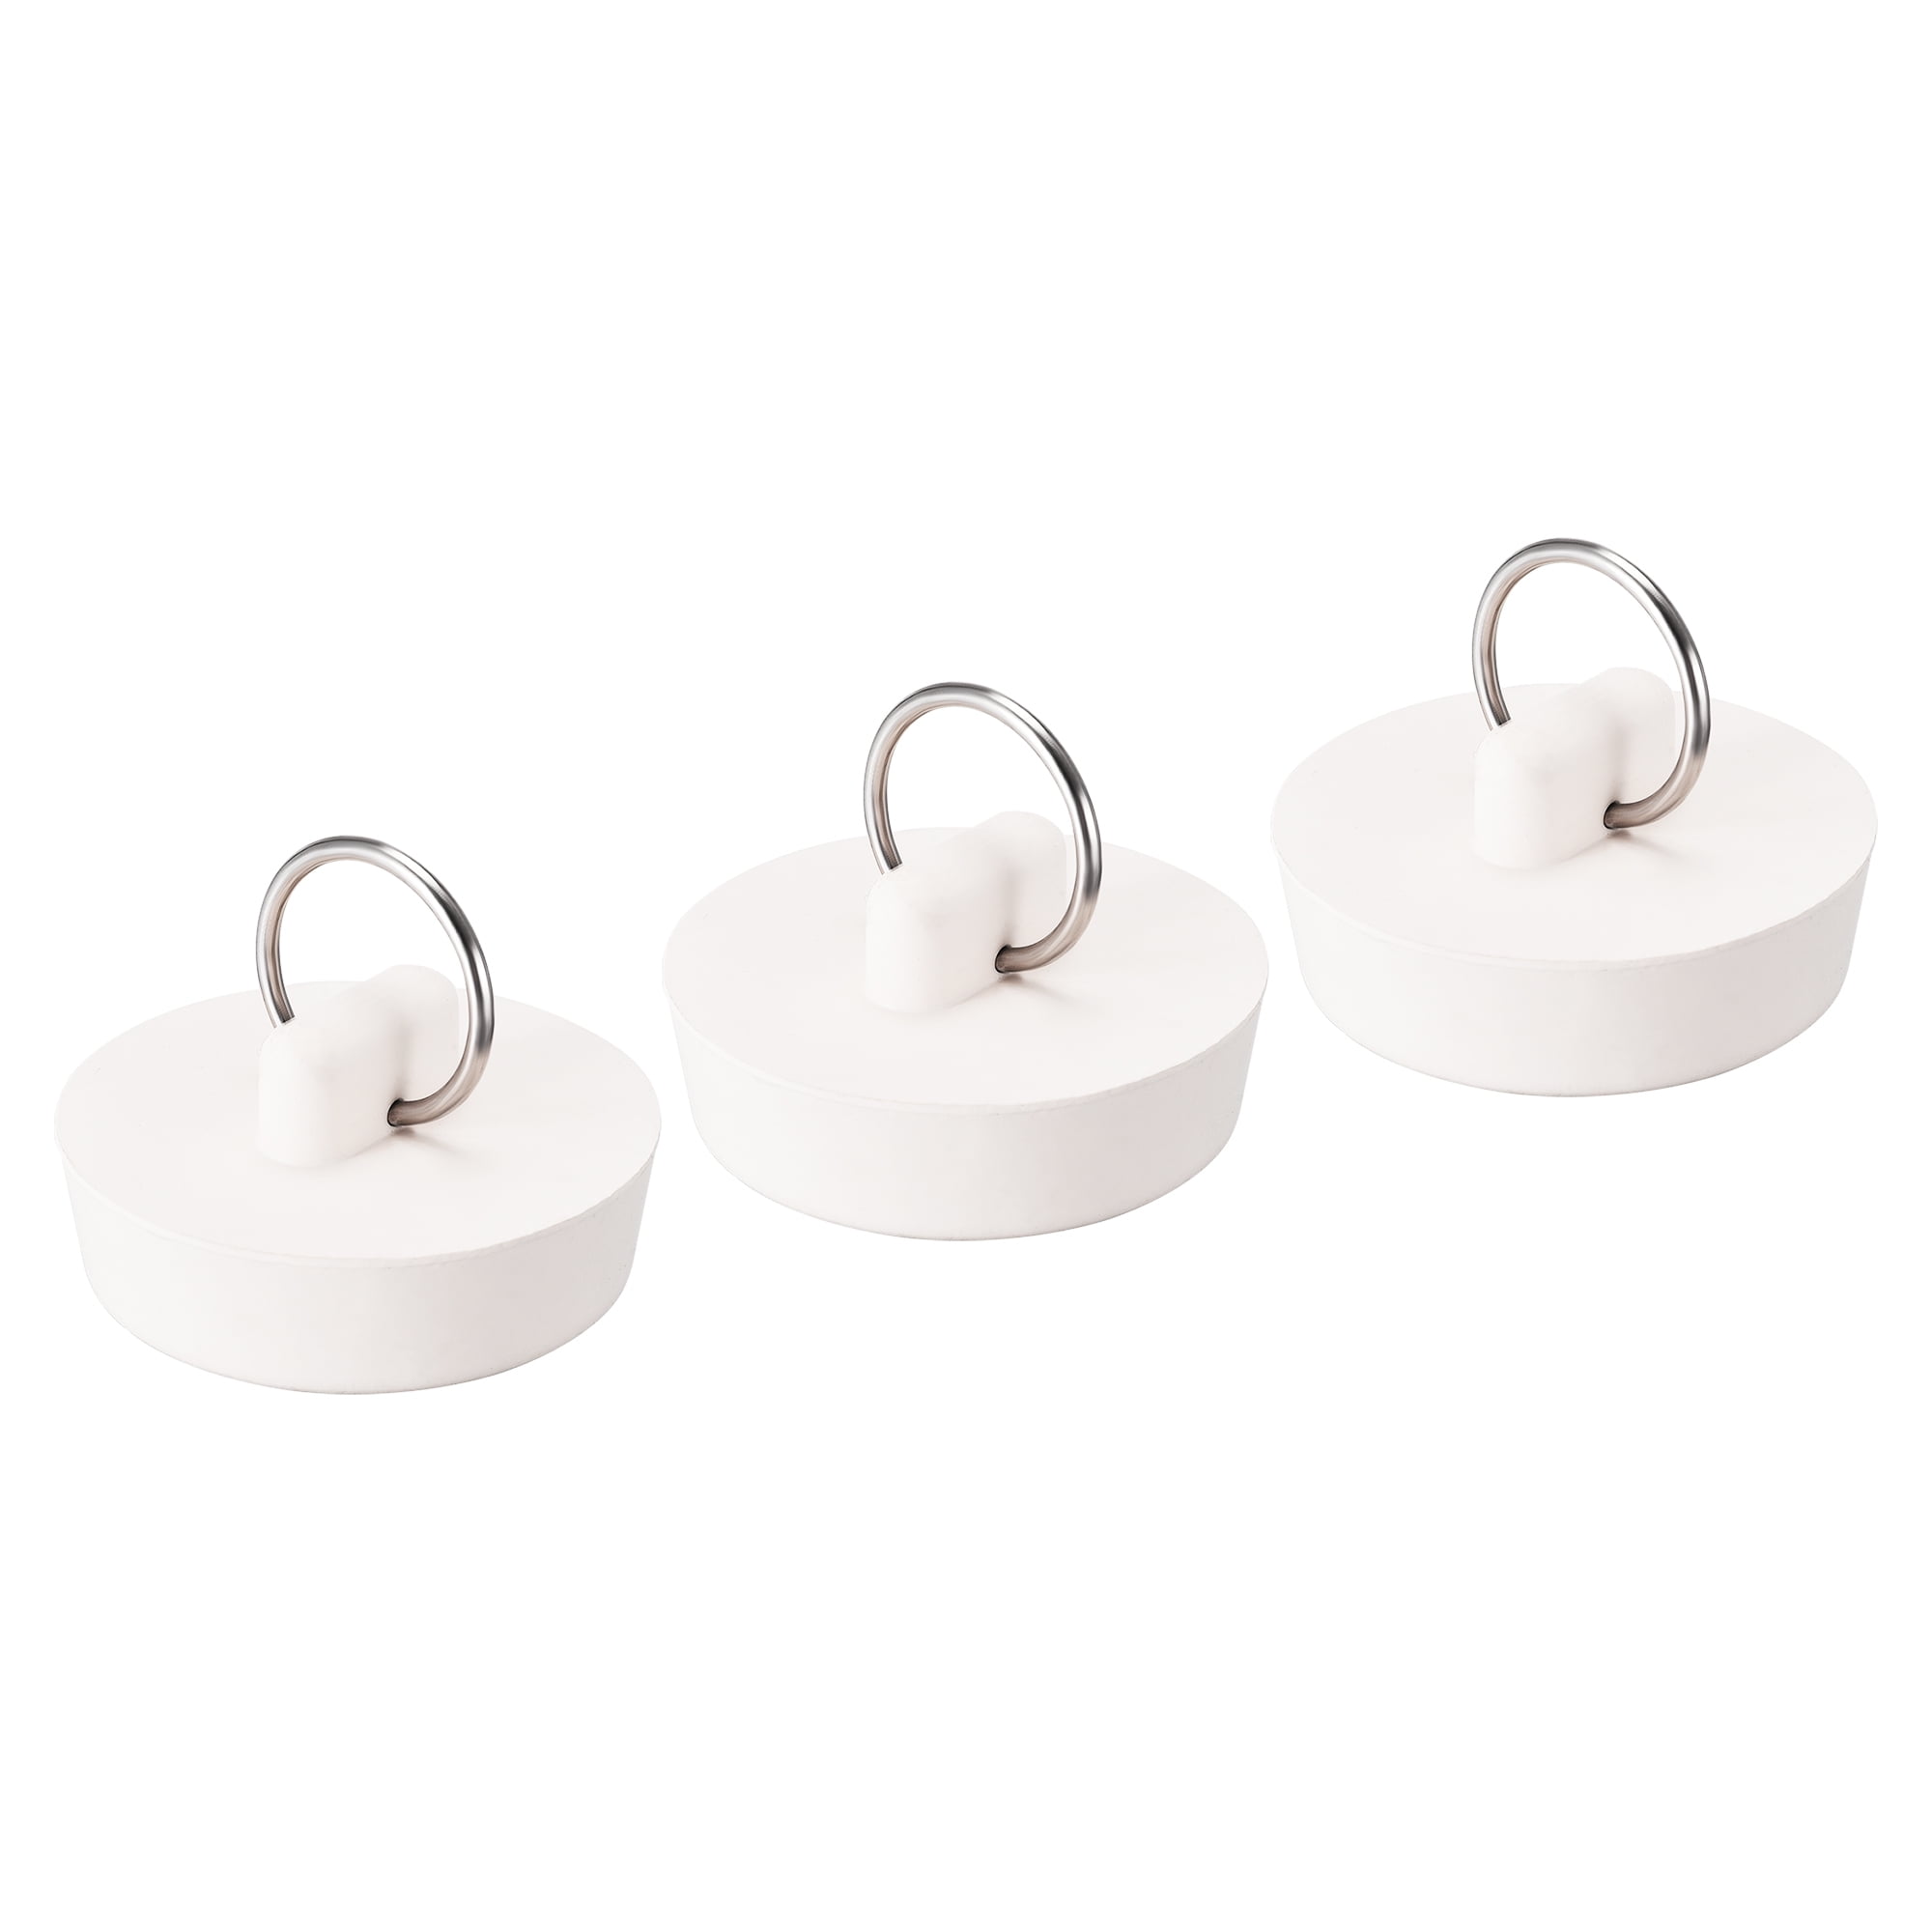 5 in. Rubber Kitchen and Bath Stopper in White